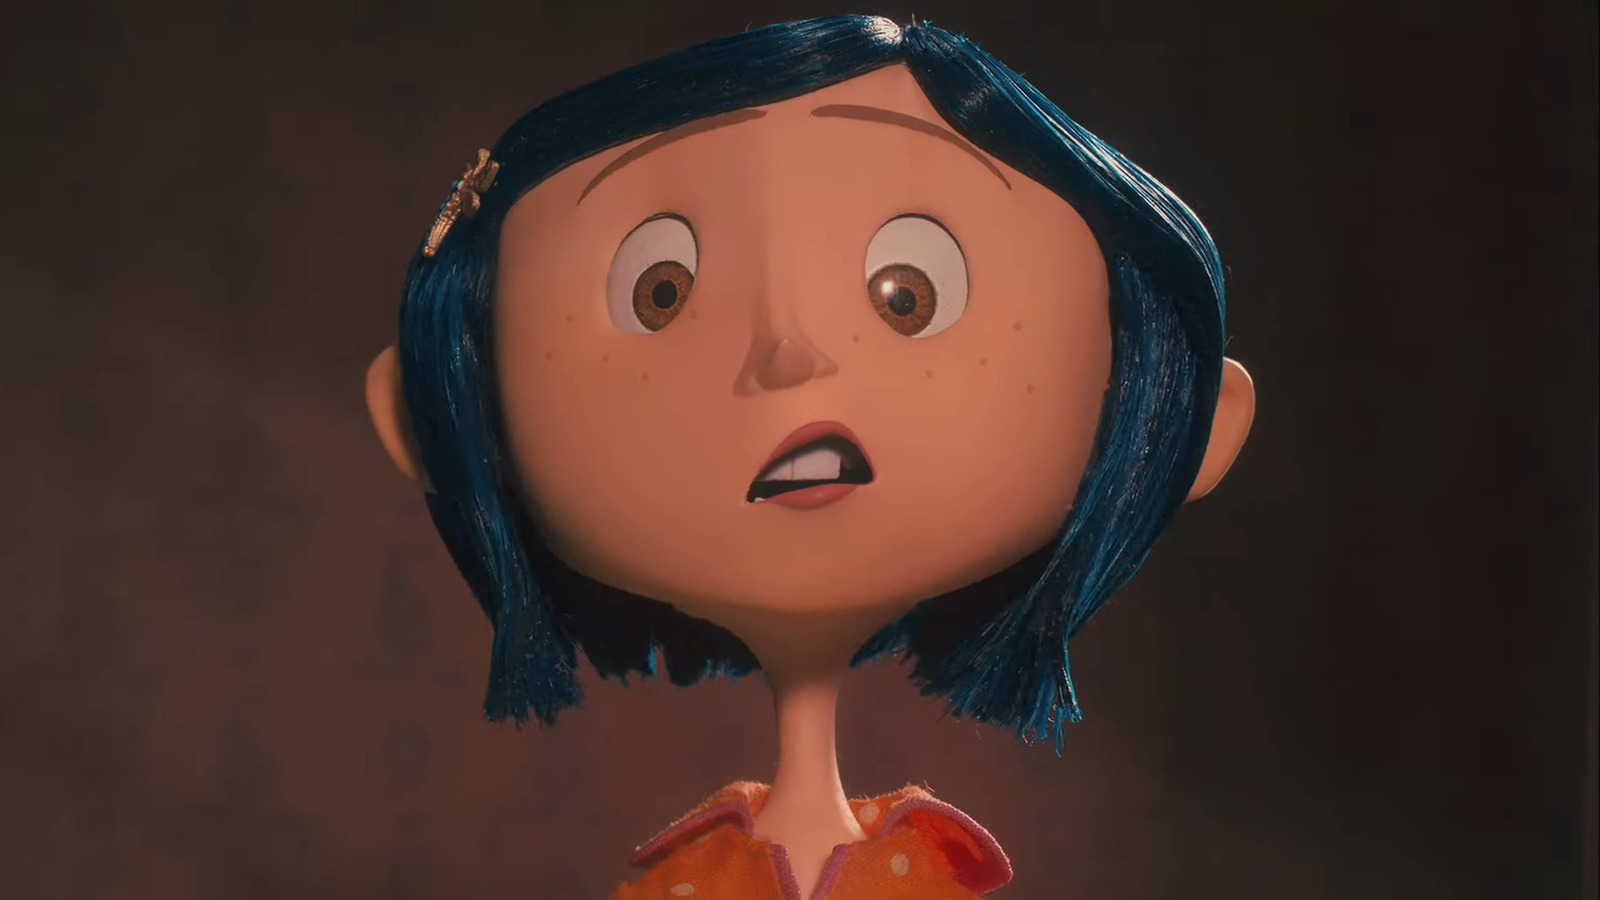 Coraline Ending Explained: There’s No Place Like Home